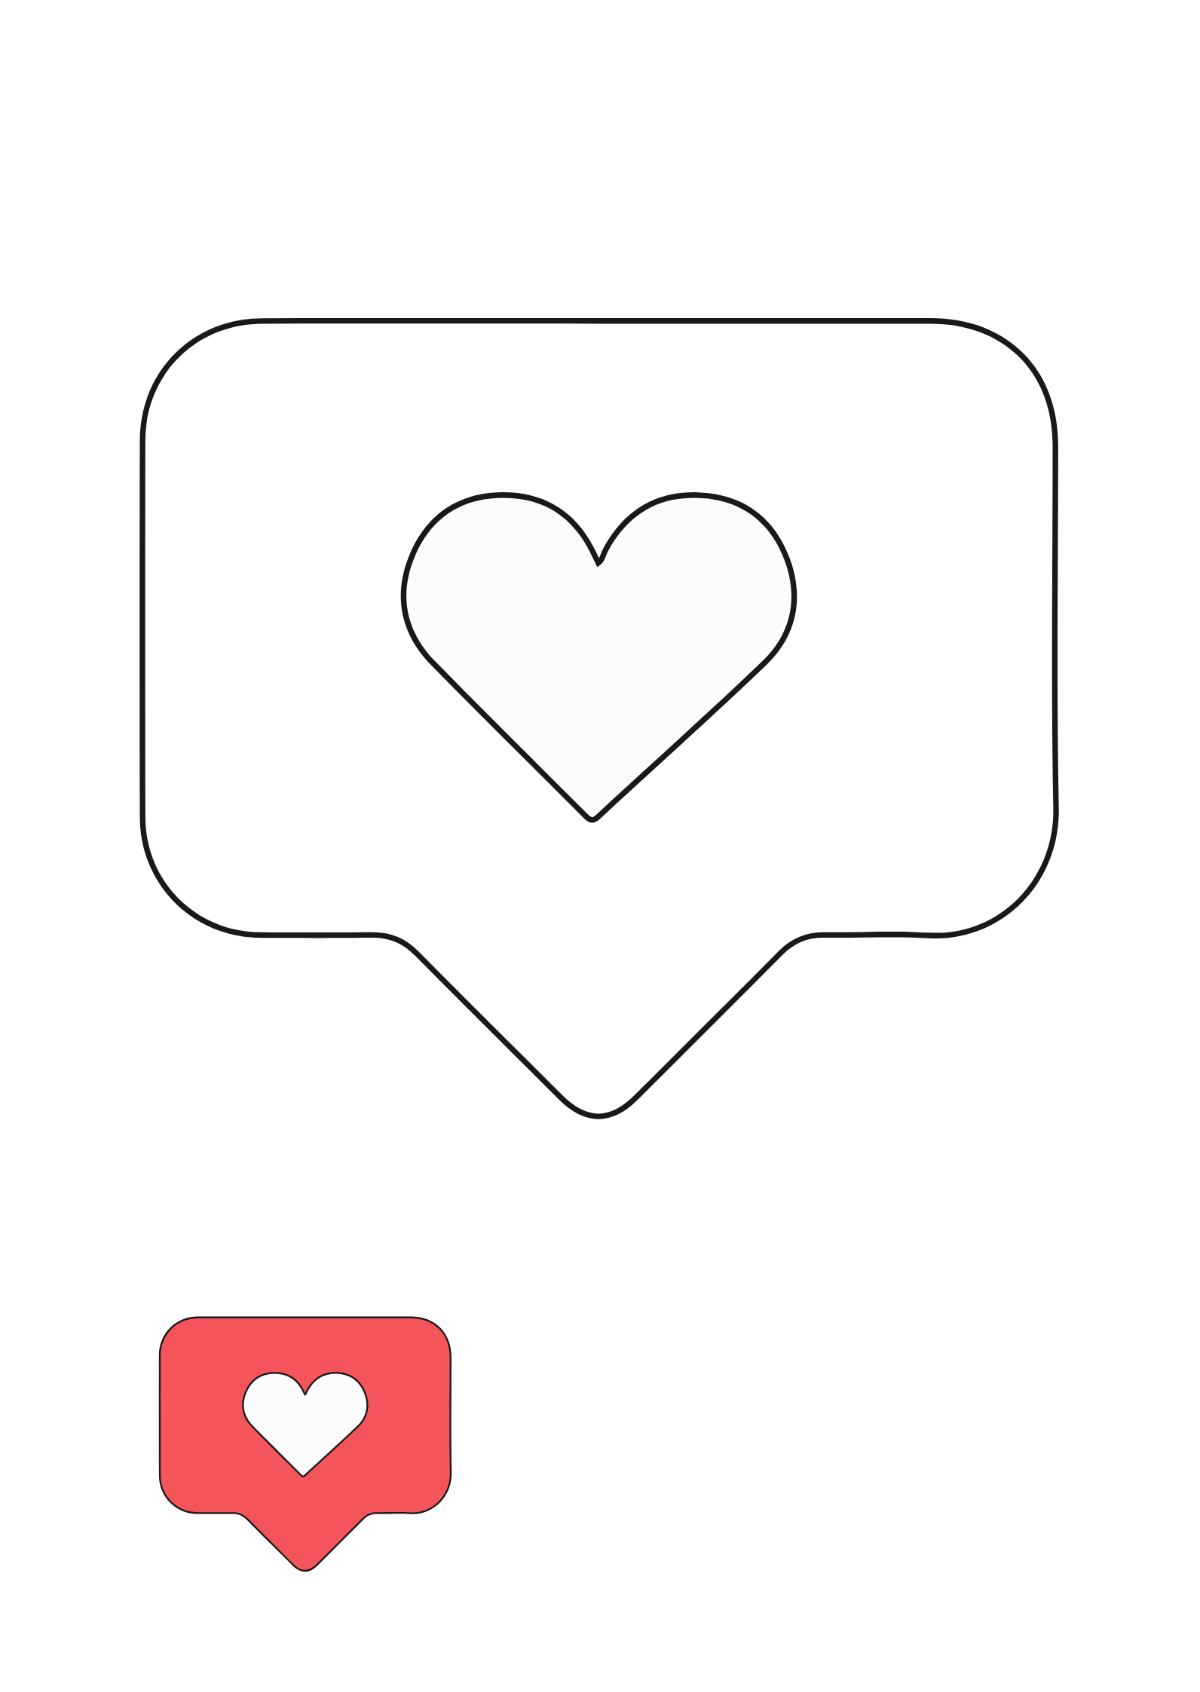 Free Instagram Heart Coloring Page Template